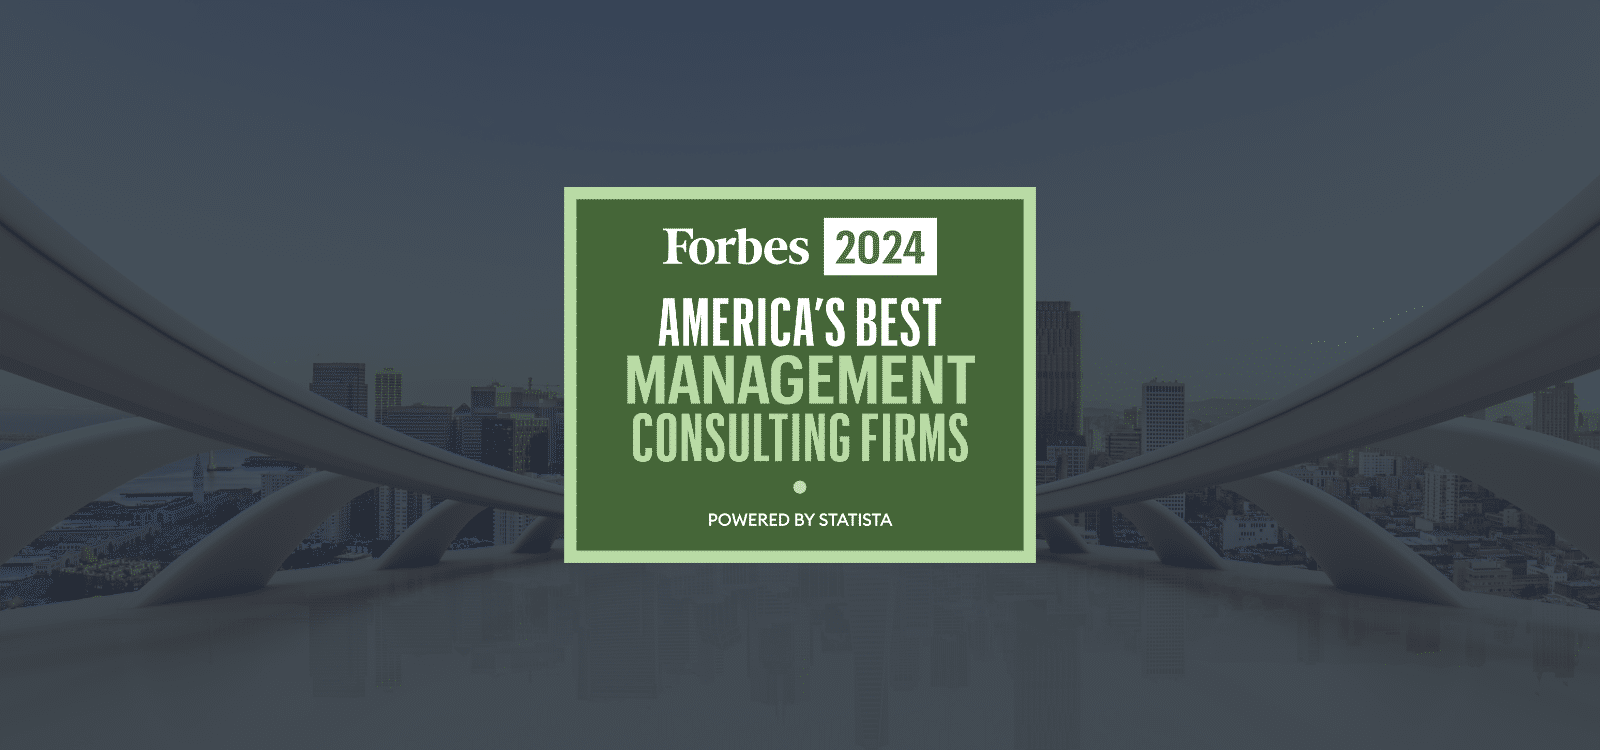 Forbes 2024, America's Best Management Consulting Firms